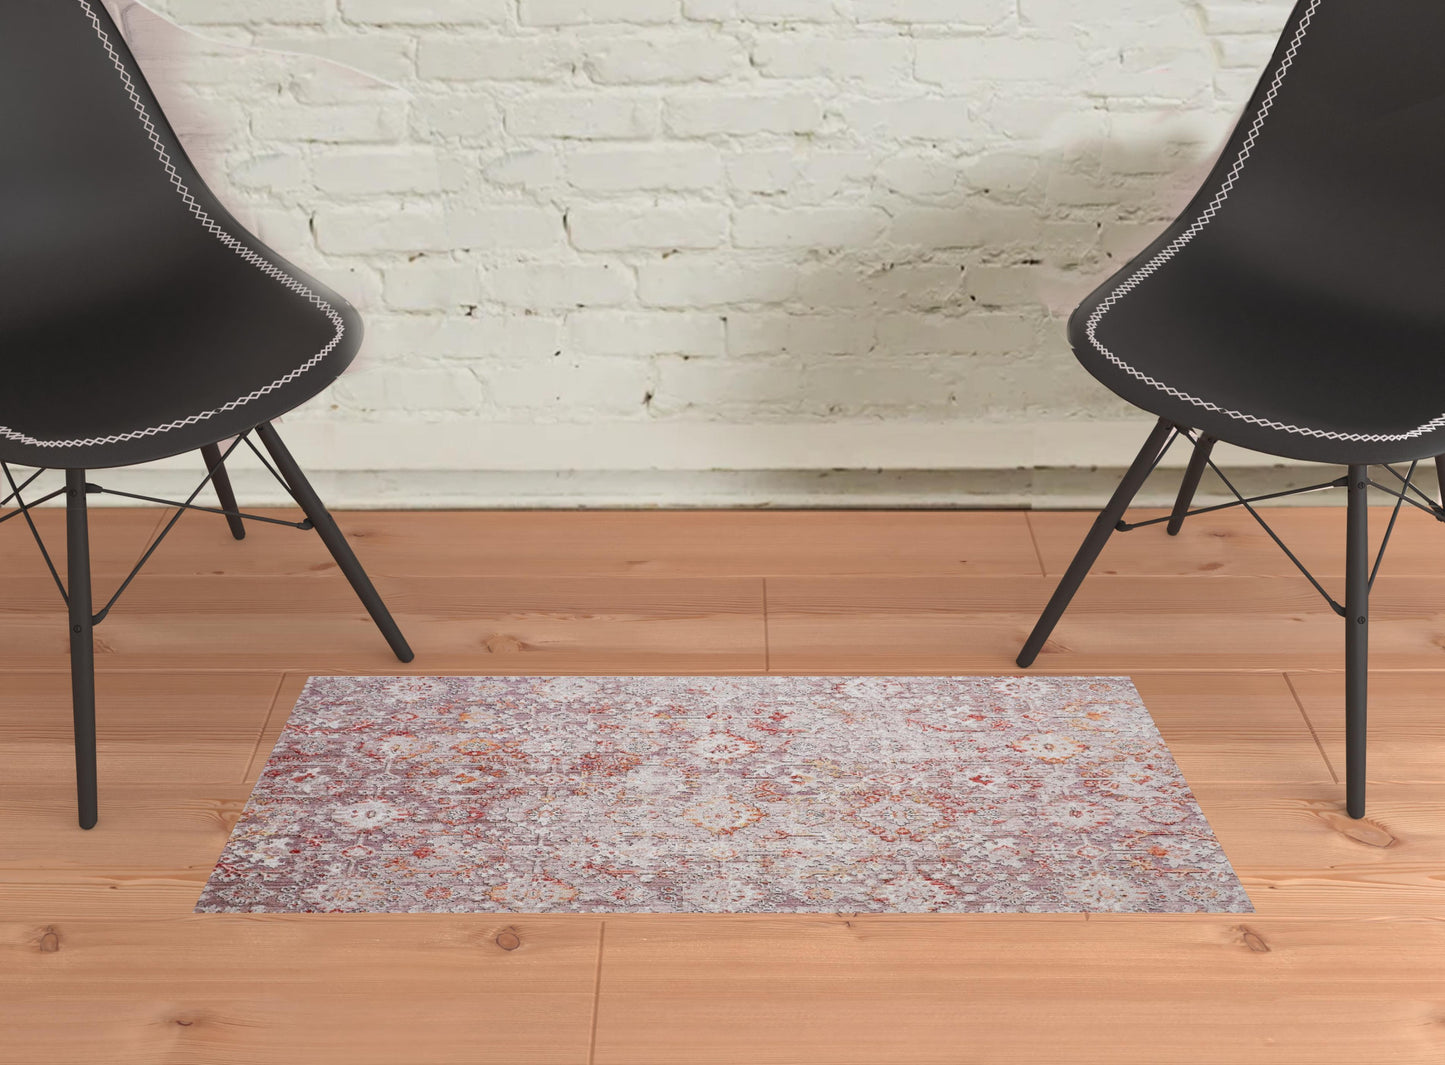 7' x 10' Pink and Ivory Abstract Area Rug